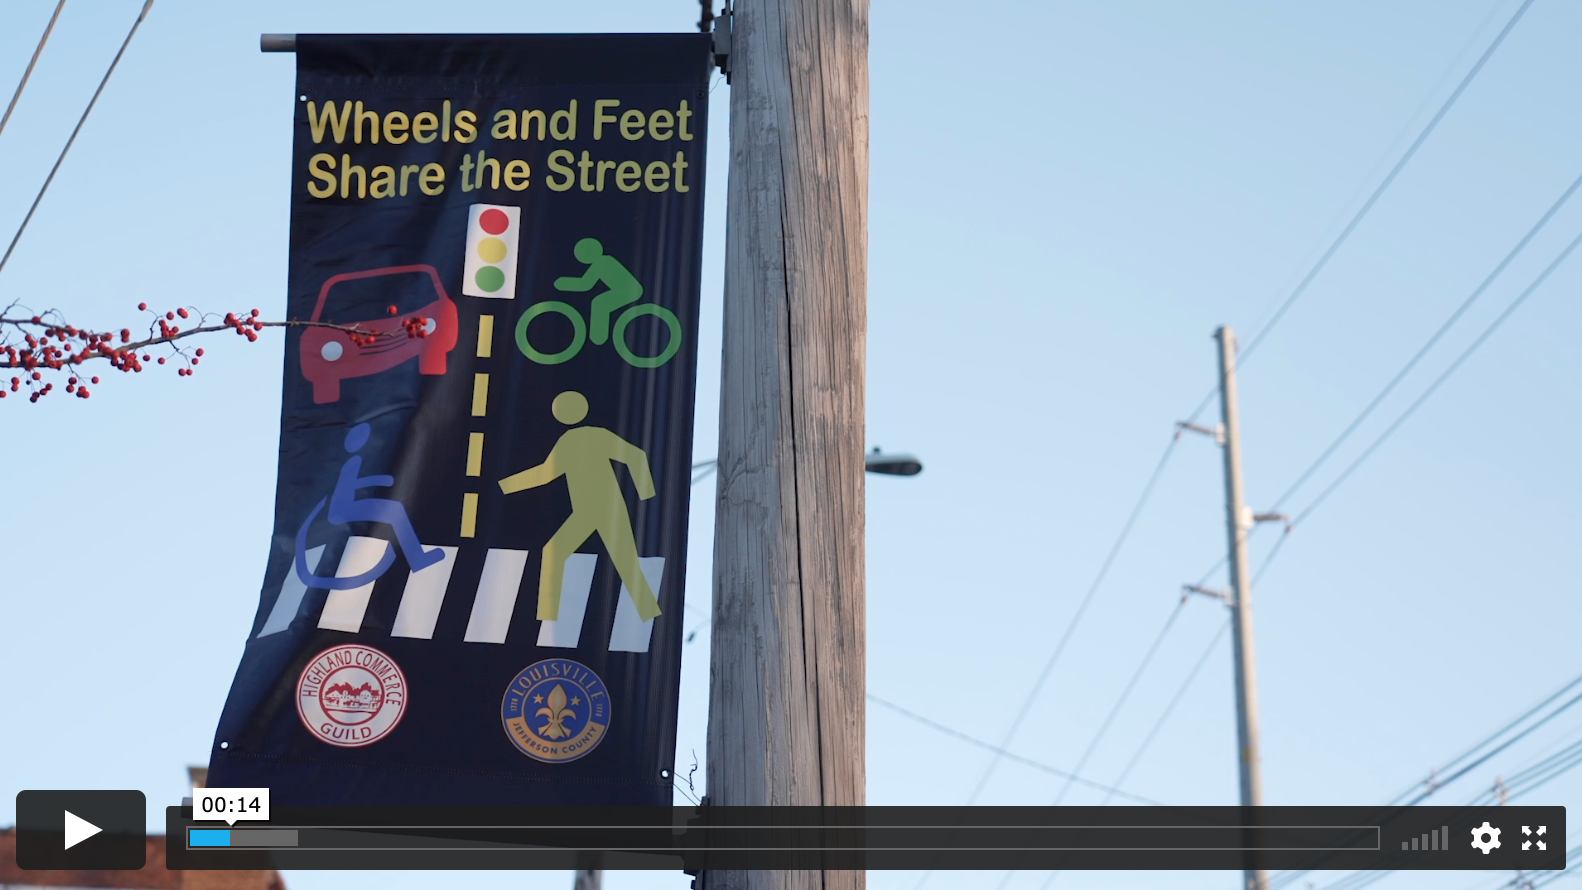 VIDEO: “I think no matter what part of town you live in, you deserve a street that is safe”